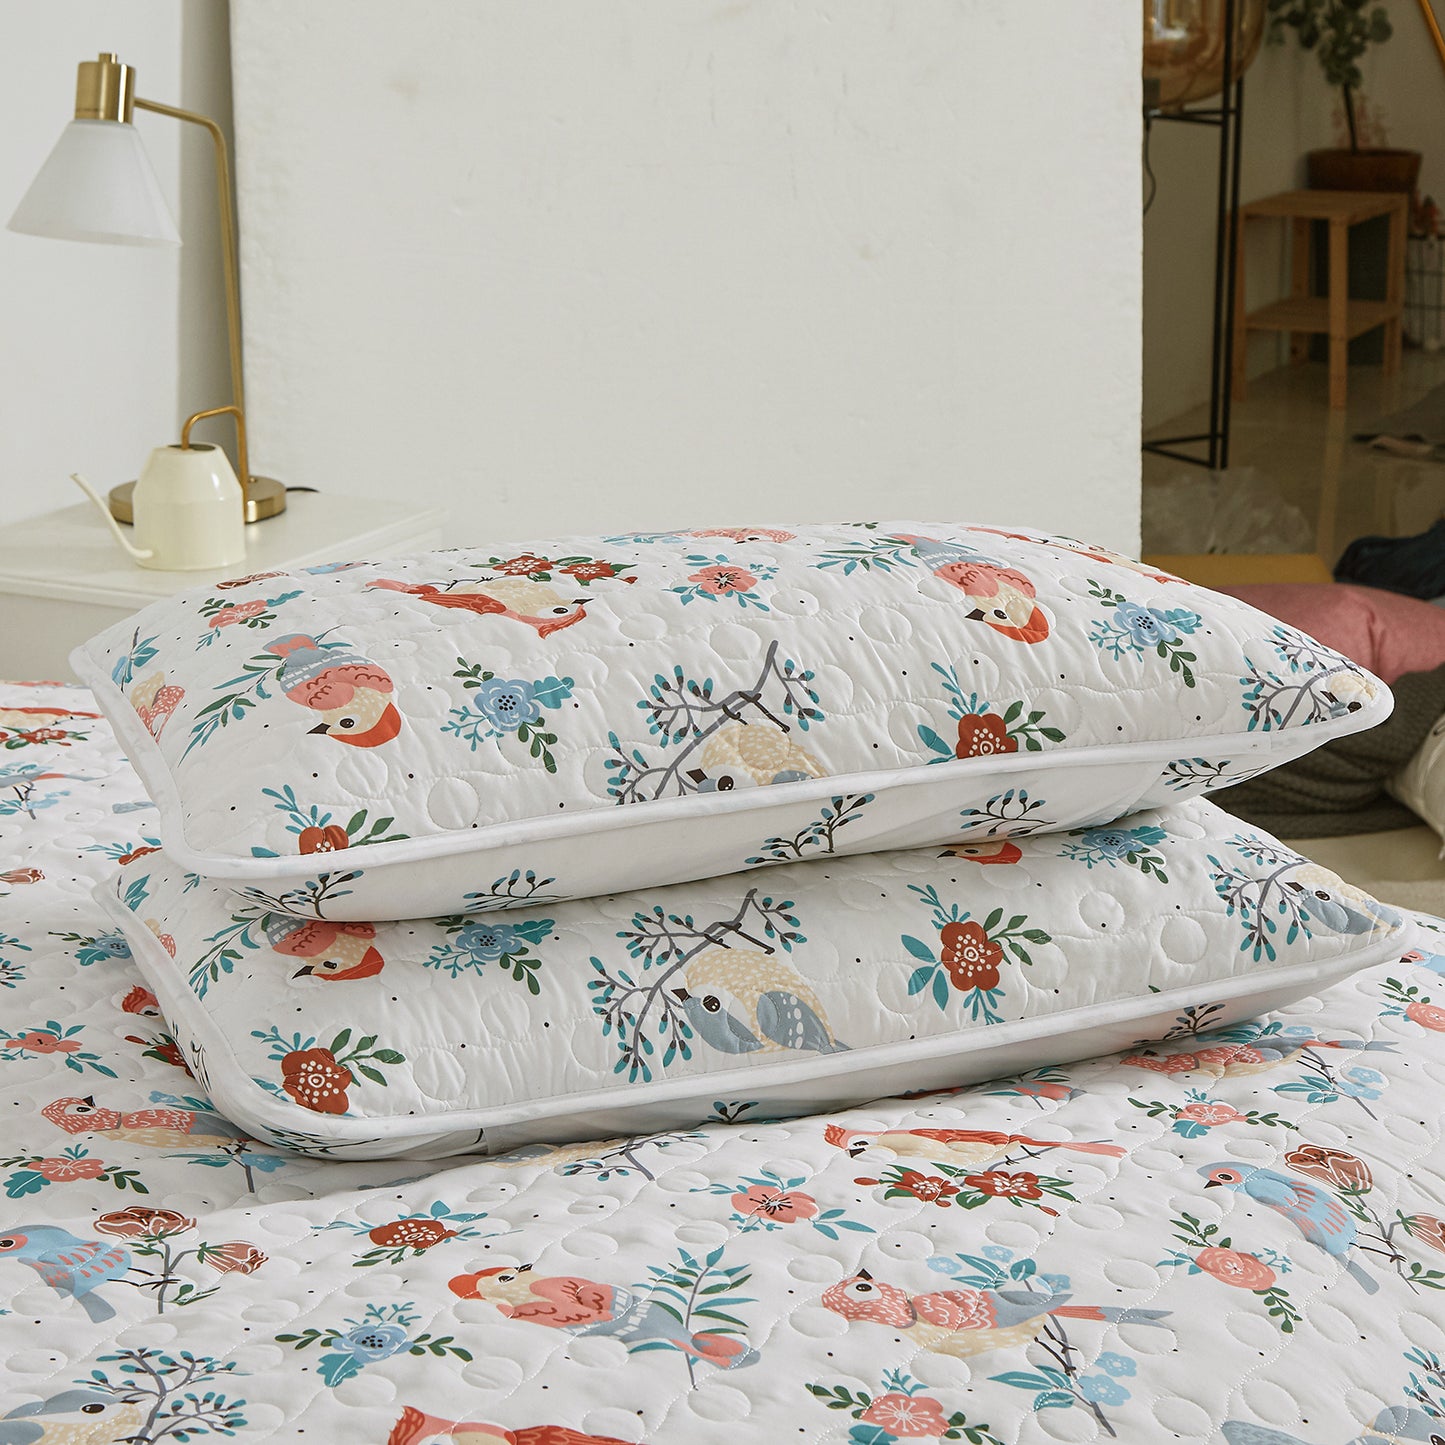 Bird Floral Plant Print Bedspread Reversible Coverlet 3 Pieces Quilt Set with 2 Pillowcases